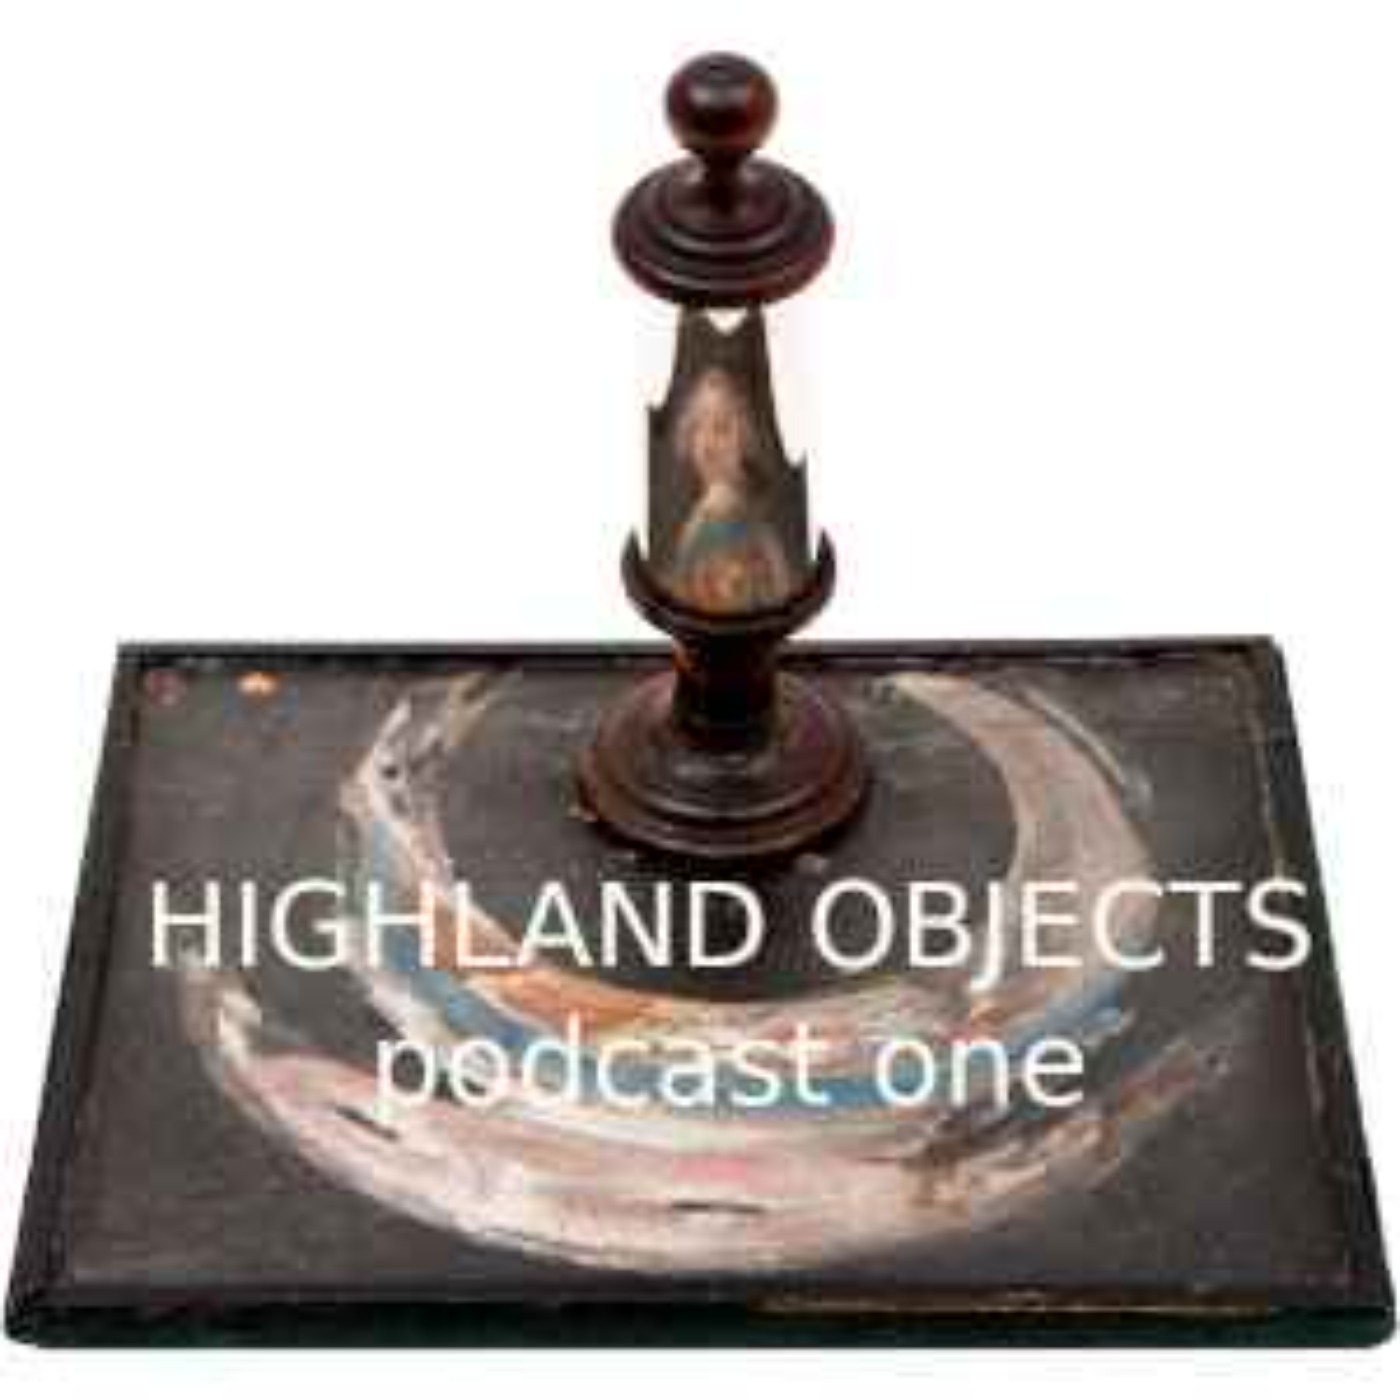 cover art for The Secret Portrait of Prince Charles Edward Stuart - Highland Objects Podcast One